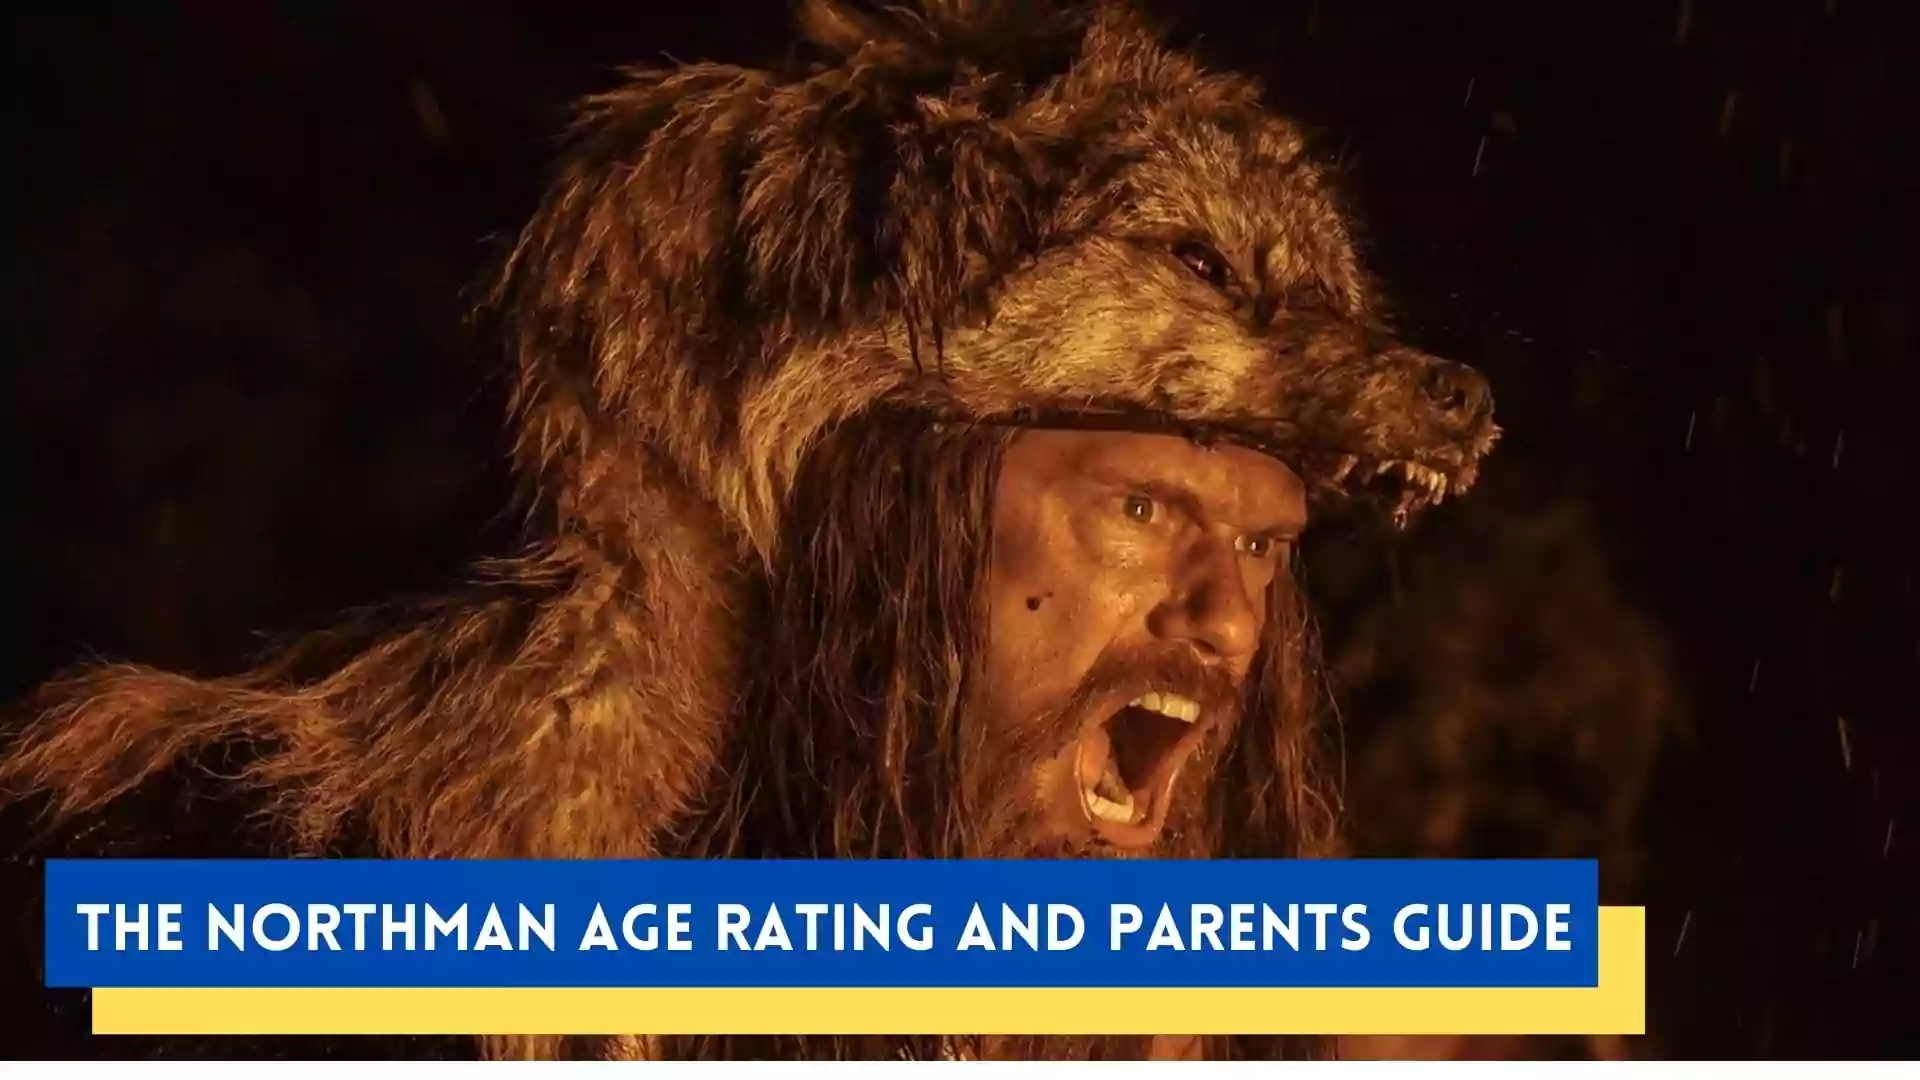 The Northman Parents guide | The Northman Age Rating (2022)